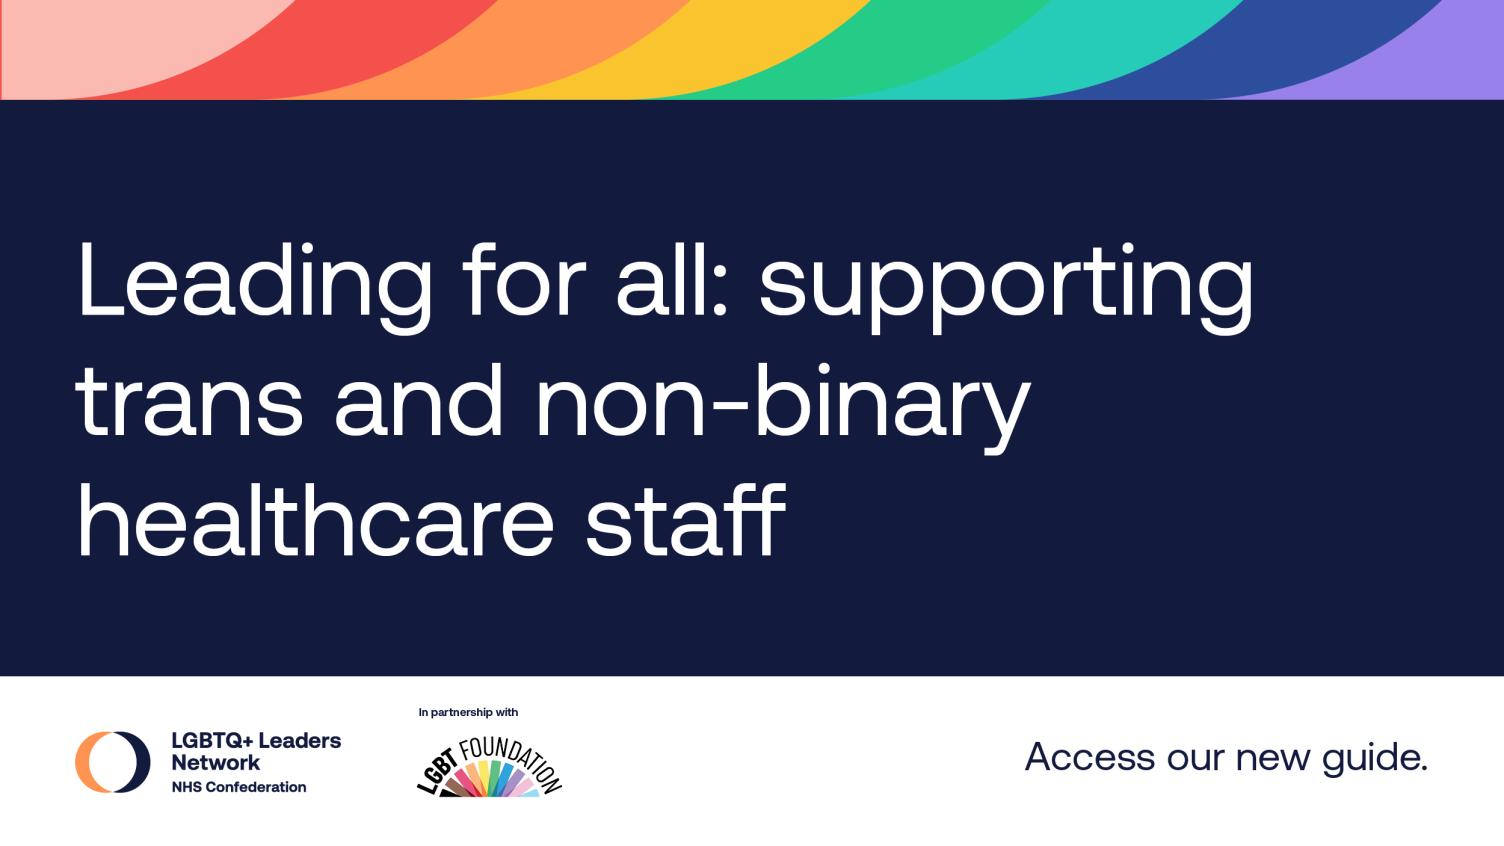 Supporting trans and non-binary healthcare staff